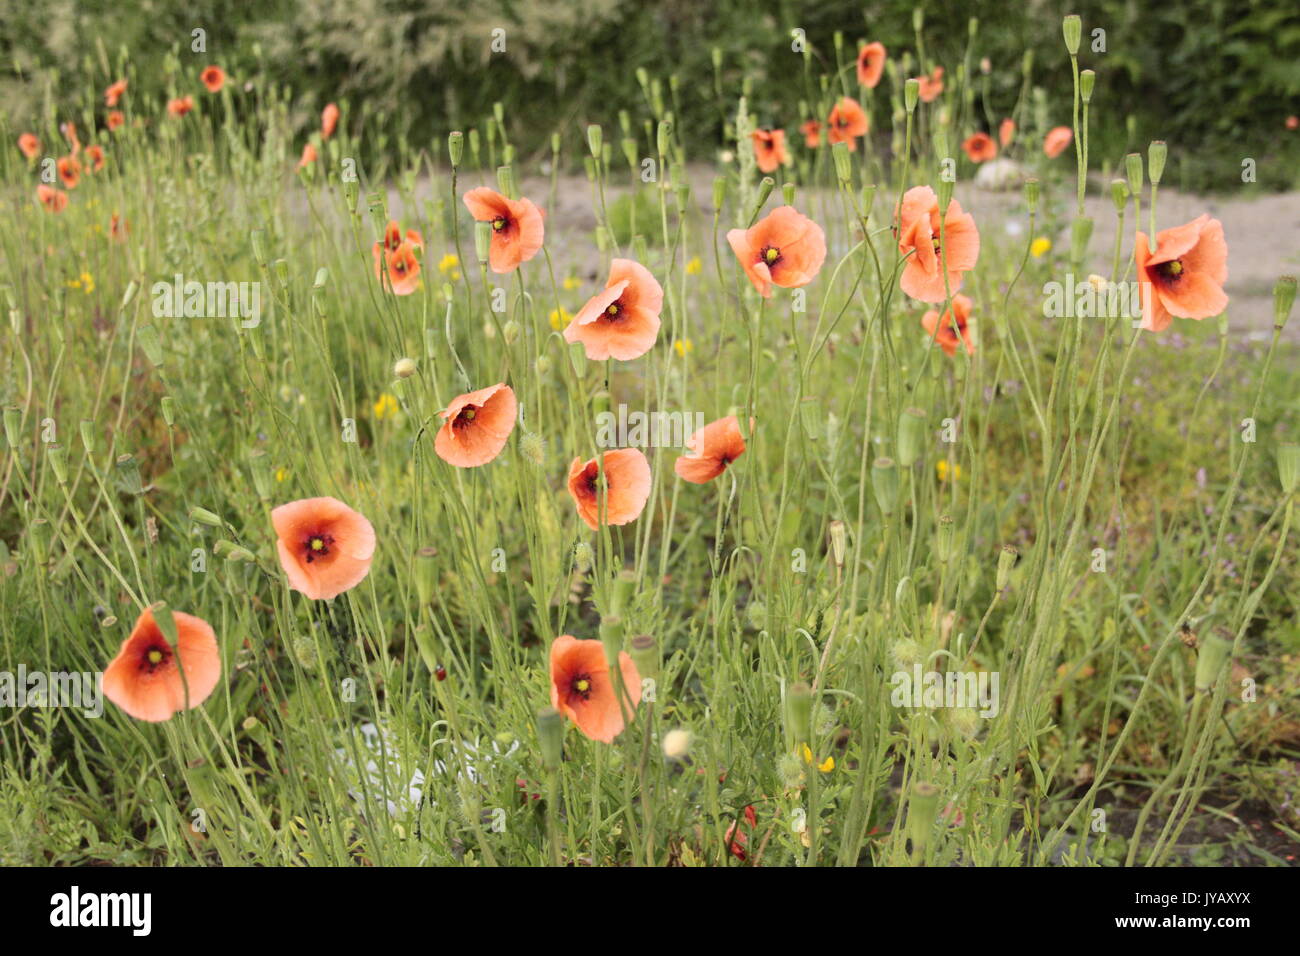 Common field poppies/ red poppies (Papaver rhoeas) growing on broken ground. Worn in remembrance of fallen soldiers. Stock Photo